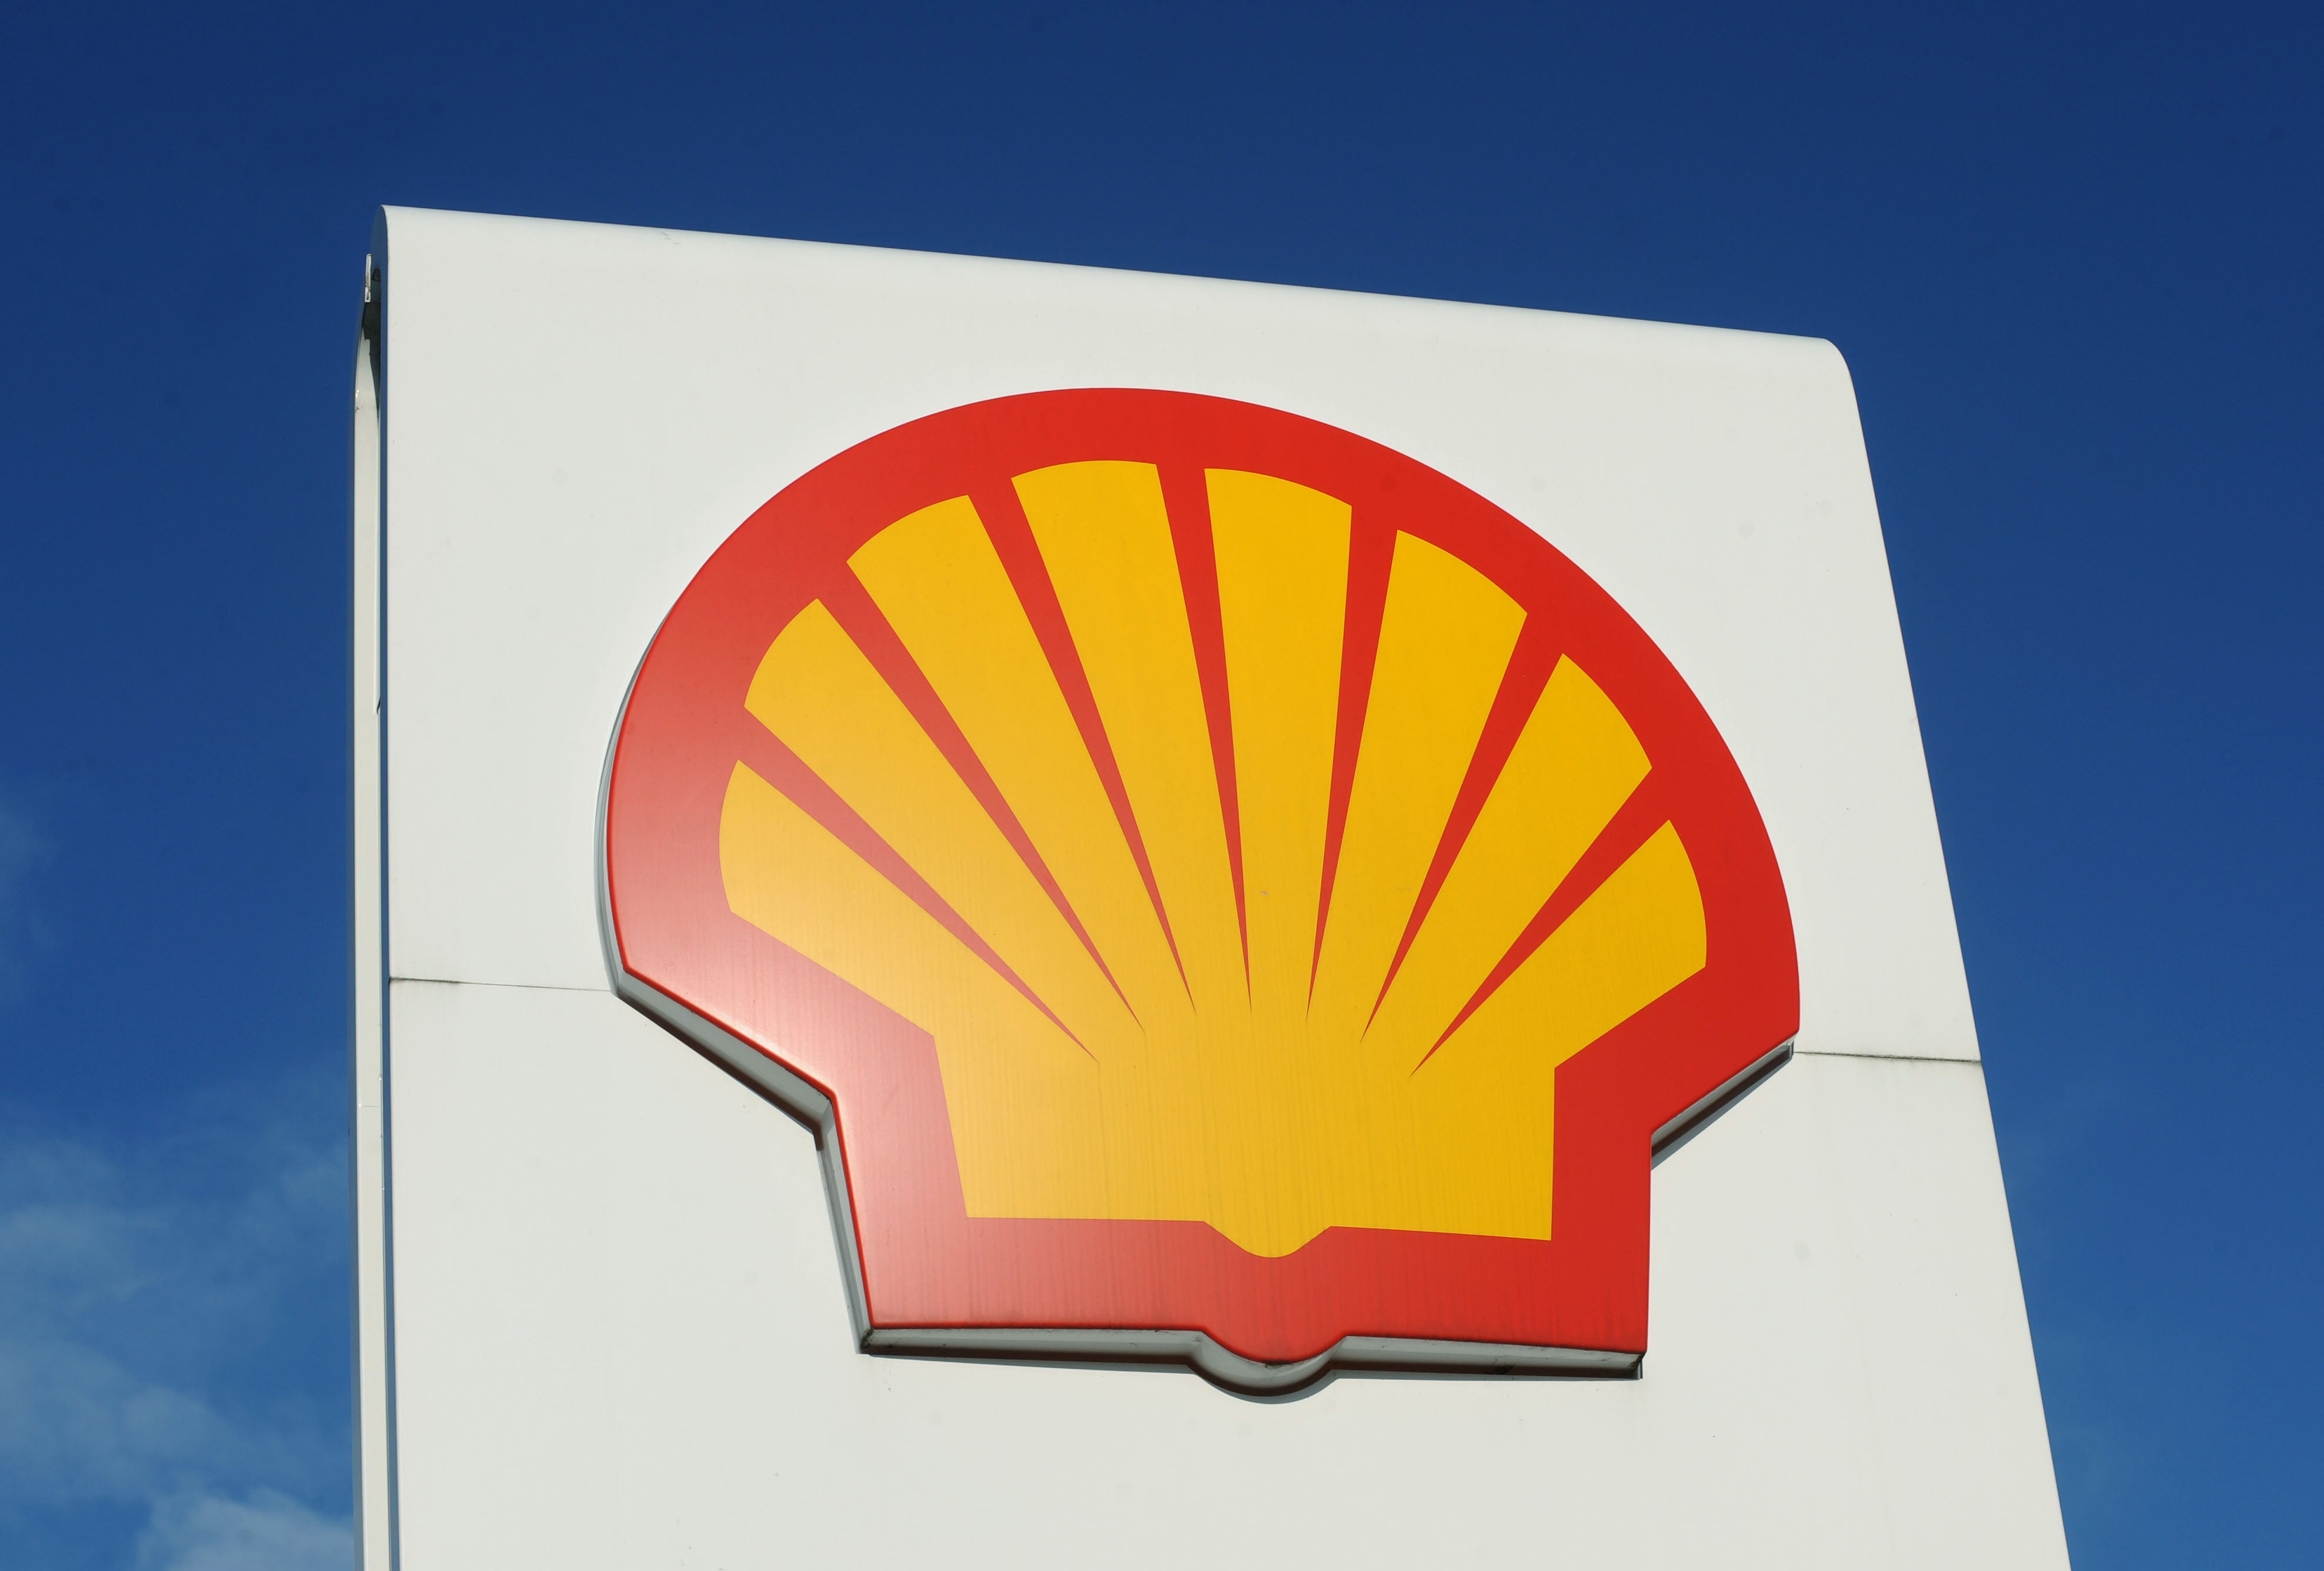 Shell said it will get rid of all stakes in joint ventures with Gazprom. (Anna Gowthorpe/PA)